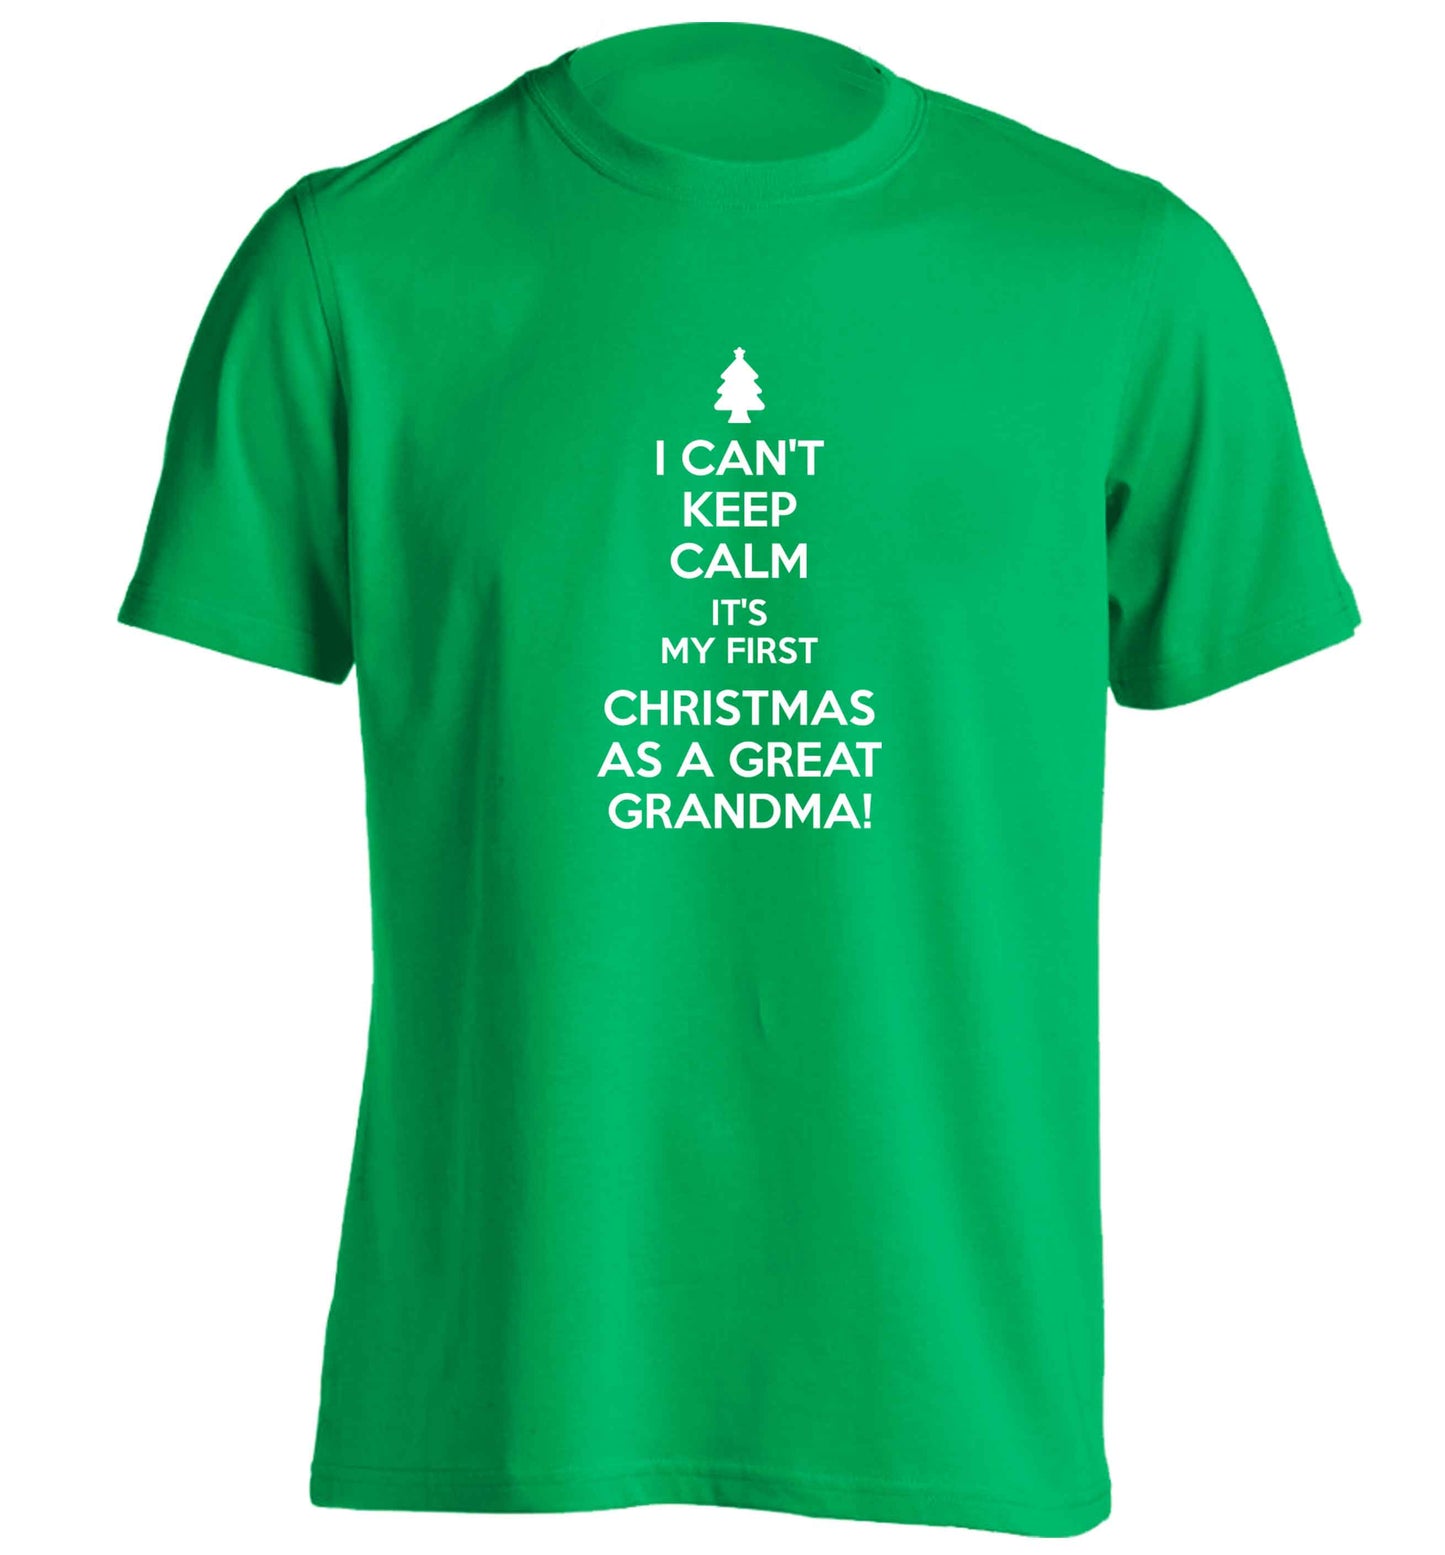 I can't keep calm it's my first Christmas as a great grandma! adults unisex green Tshirt 2XL